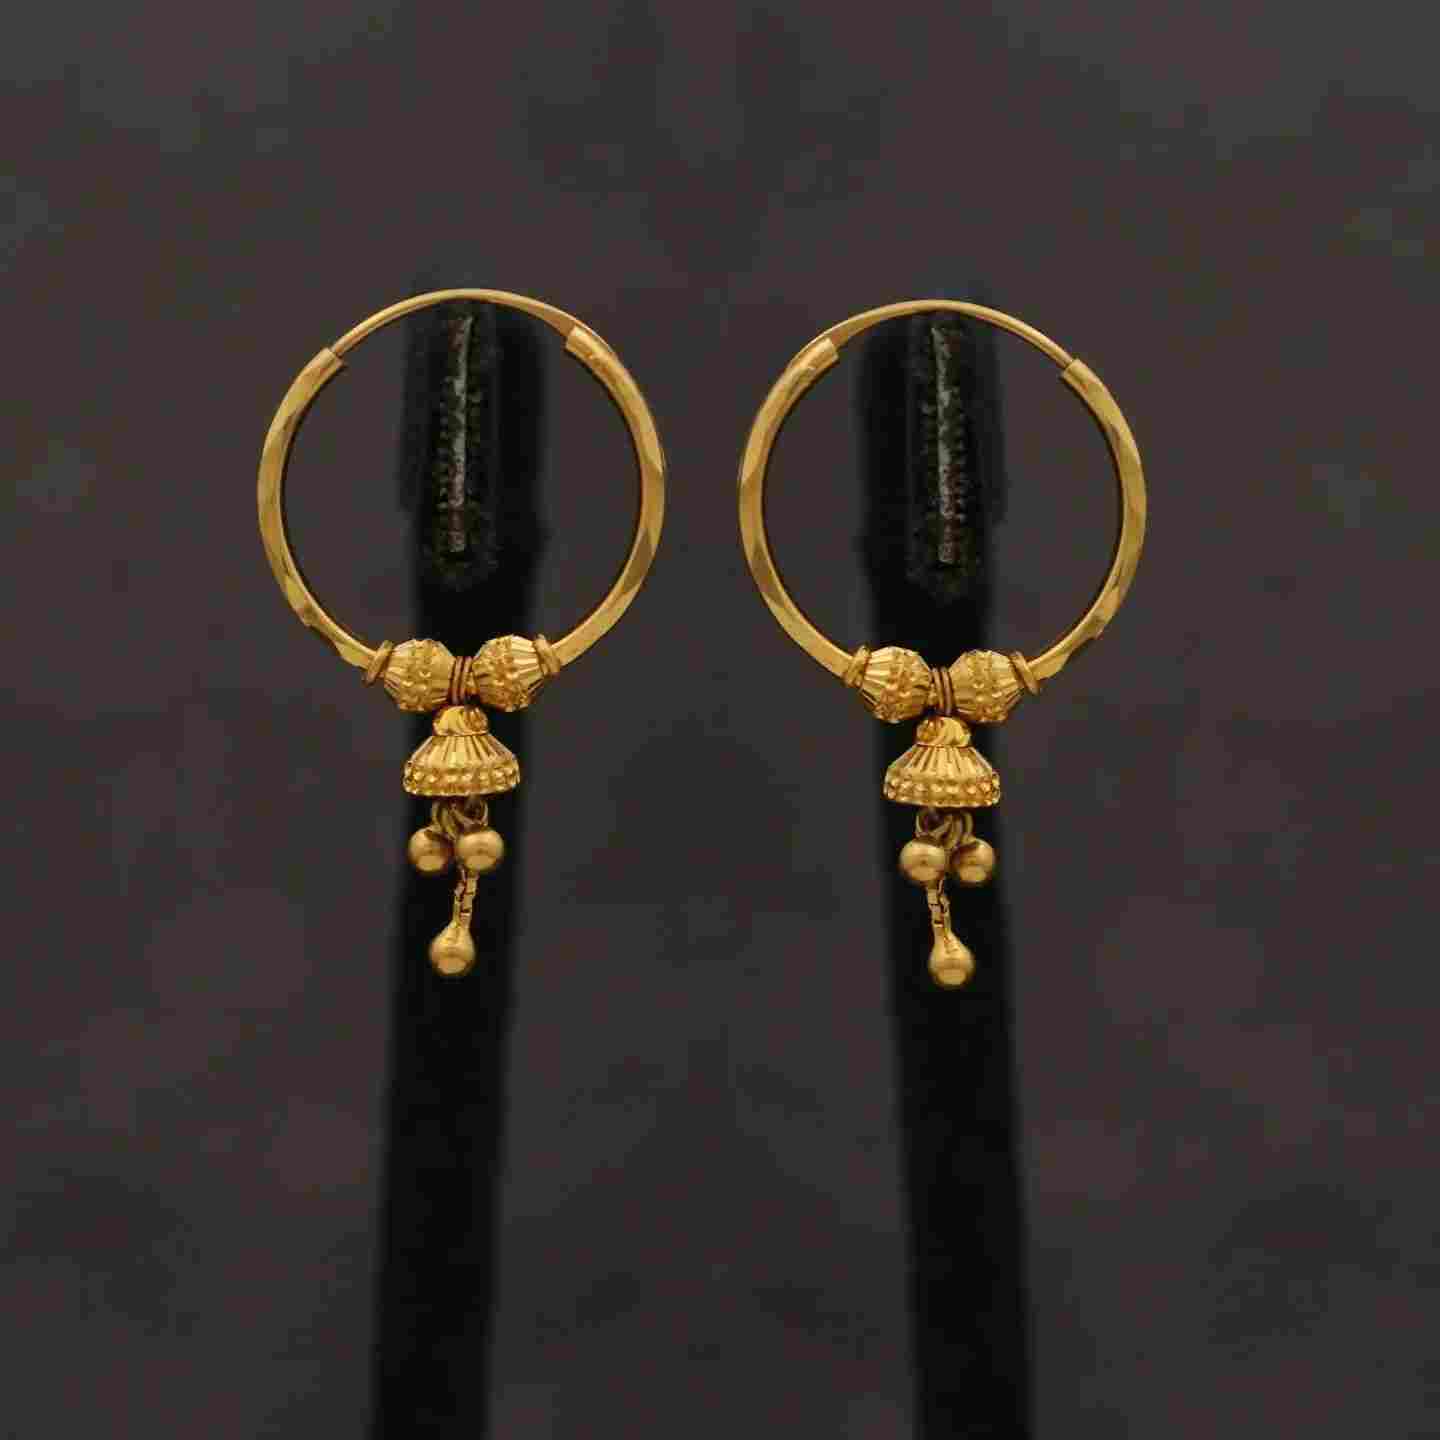 exclusive gold big Bali earrings designs with weight // gold chandbali  earrings collections - YouTube